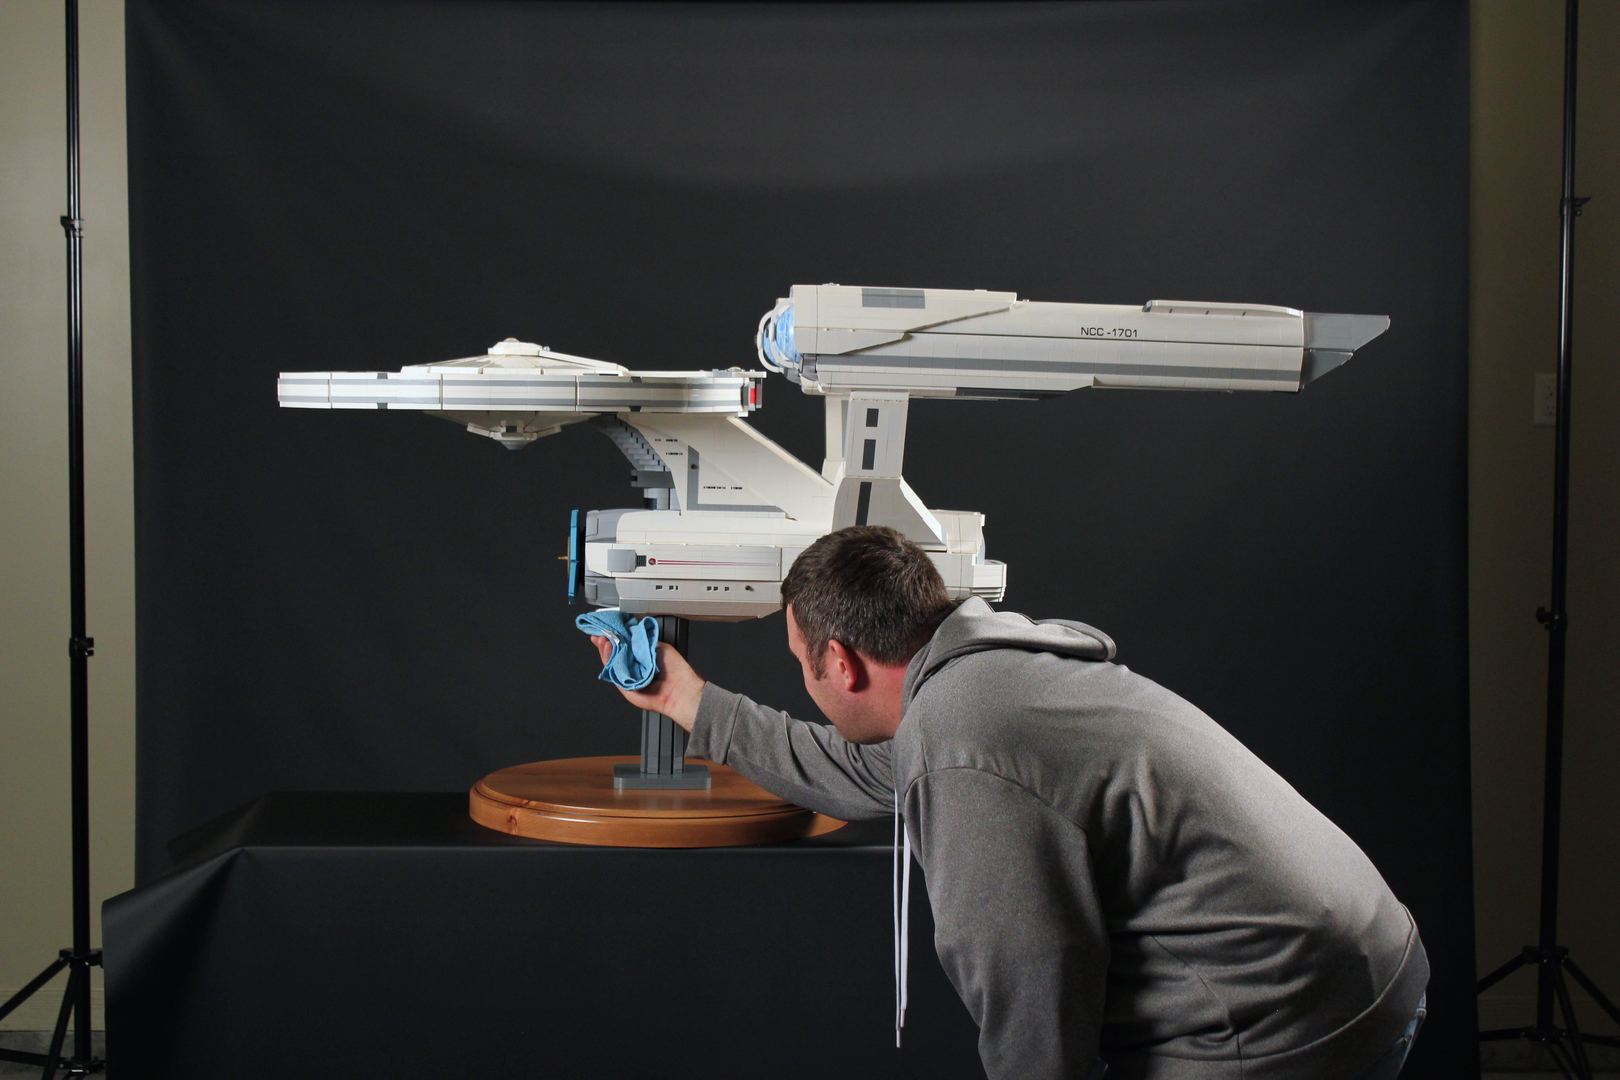 Stud-Free LEGO Enterprise Is Much Larger Than It Seems